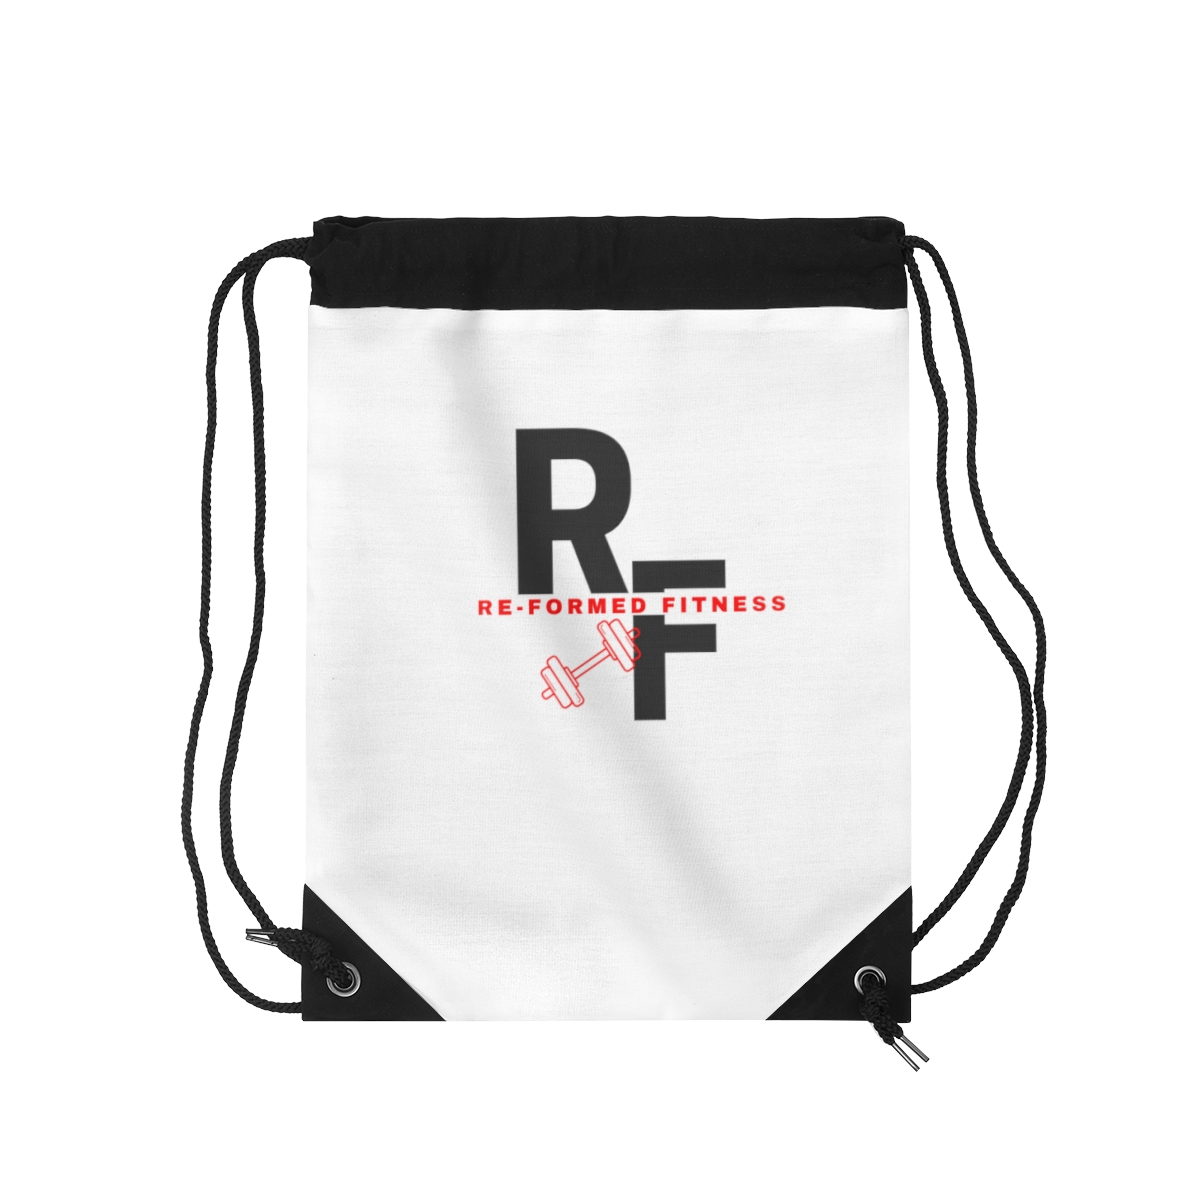 Re-Formed Fitness Brand Drawstring Bag product thumbnail image